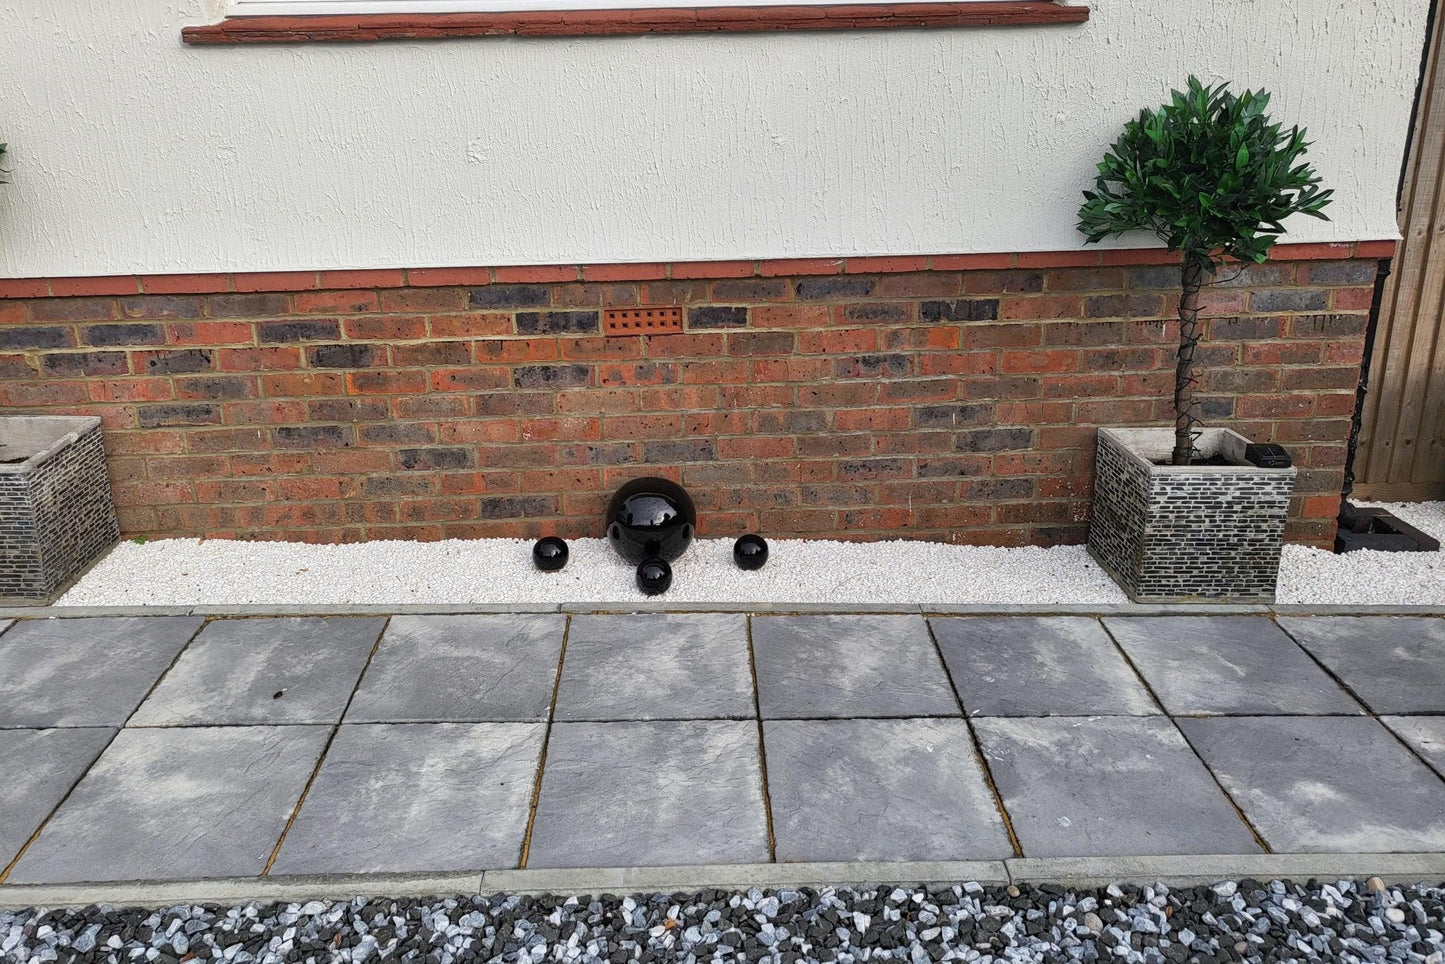 A landscaped area with a small brick wall and white gravel, featuring black ceramic pots and a round ornament. Flanked by two rectangular planters containing lush green bushes. In front of the wall is a paved walkway made of large gray tiles, alongside a path adorned with Brisks 20mm Polar Black Ice Chippings.